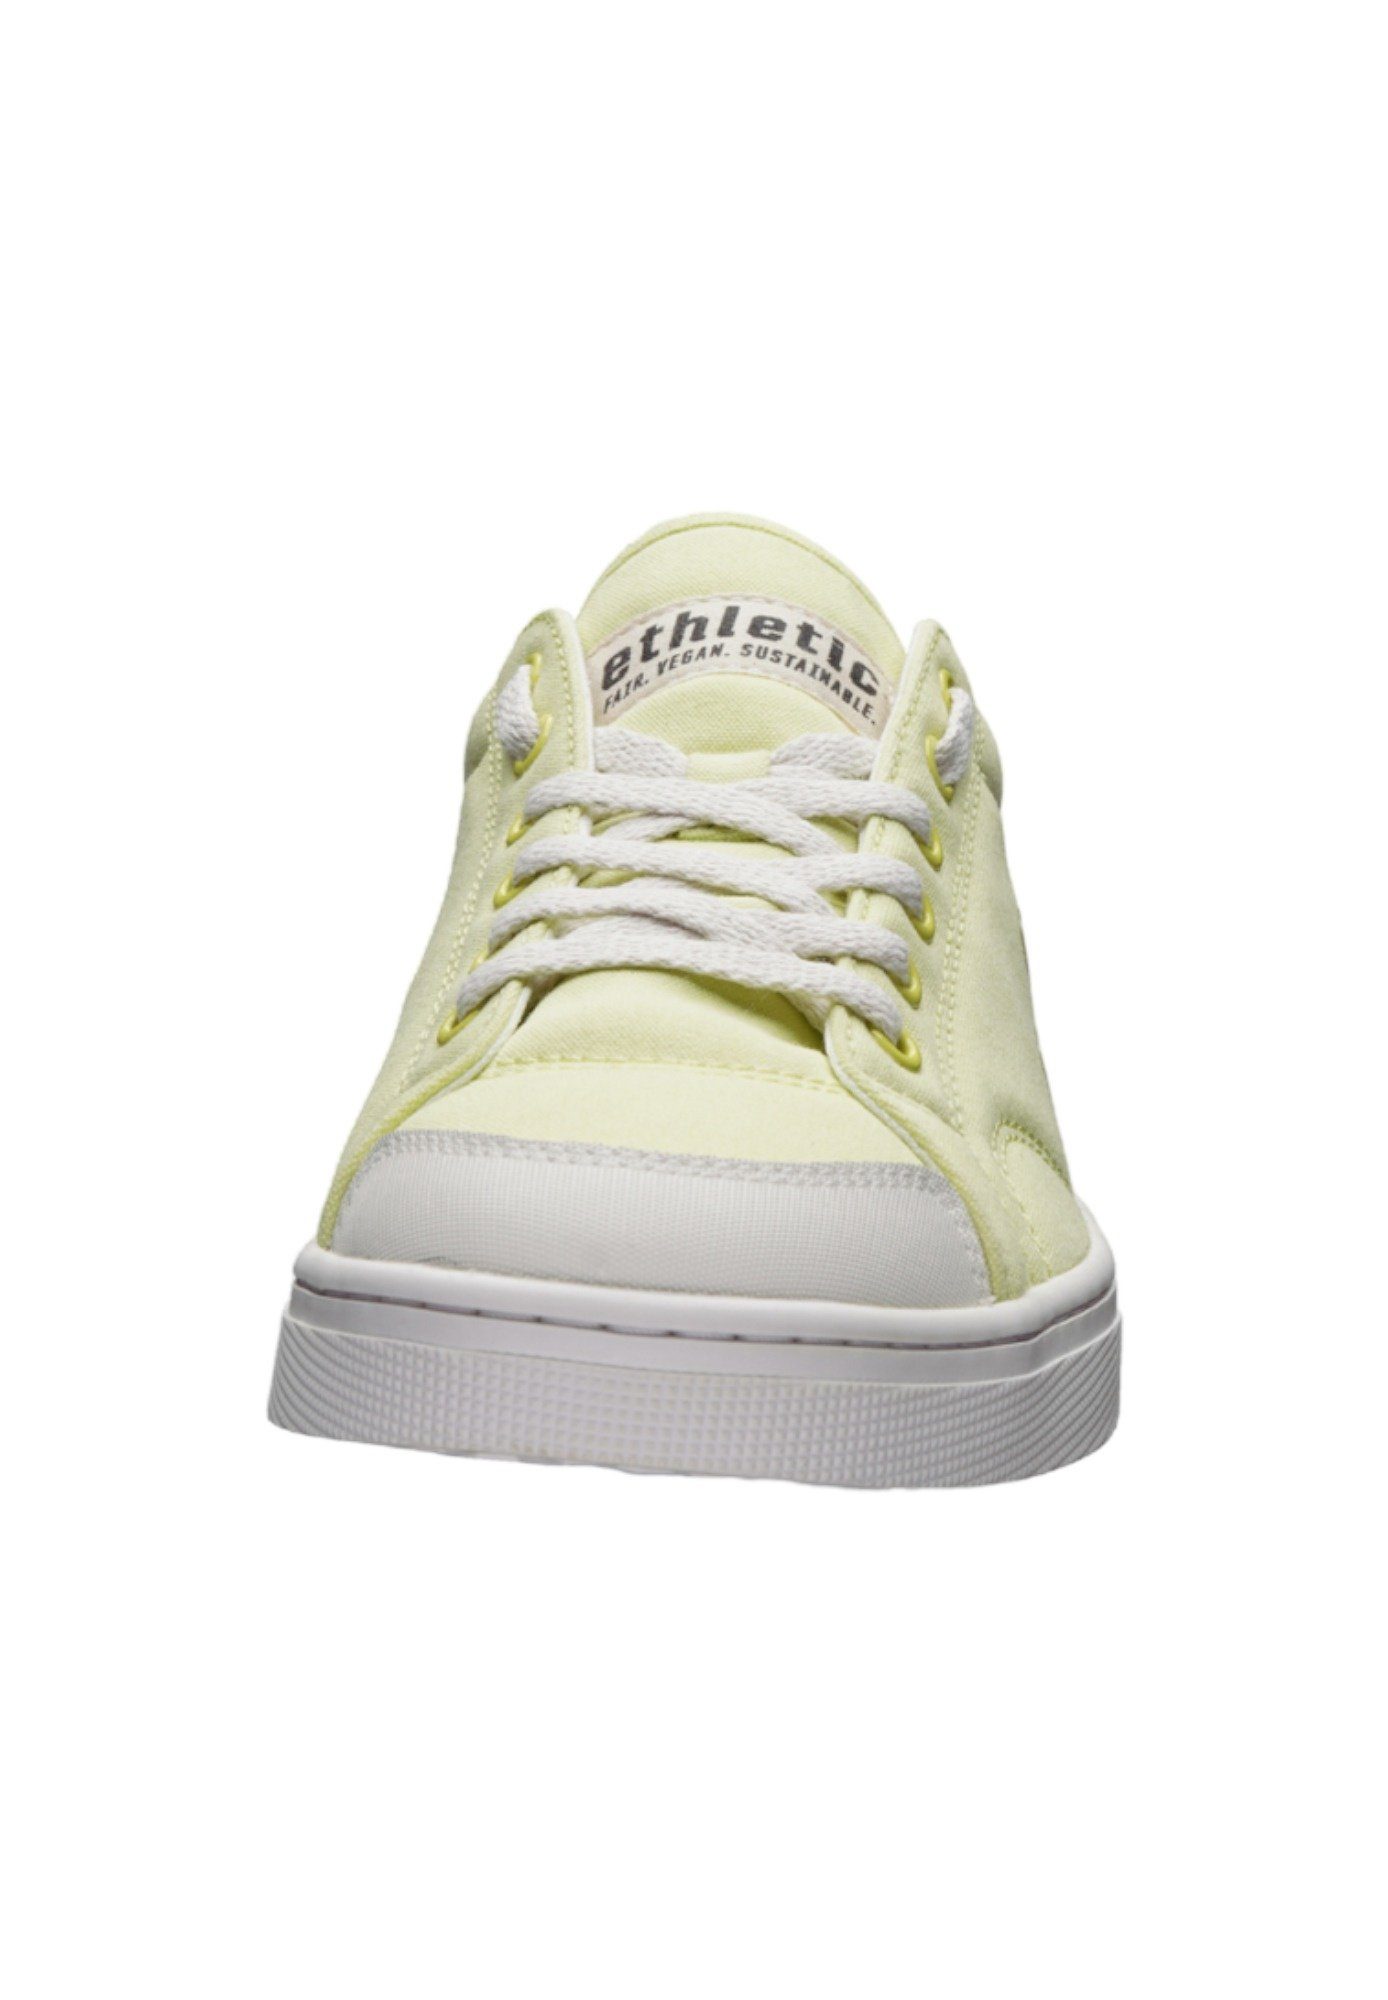 ETHLETIC Produkt Fairtrade Active Lo Cut Just White - Sneaker Yellow Lime